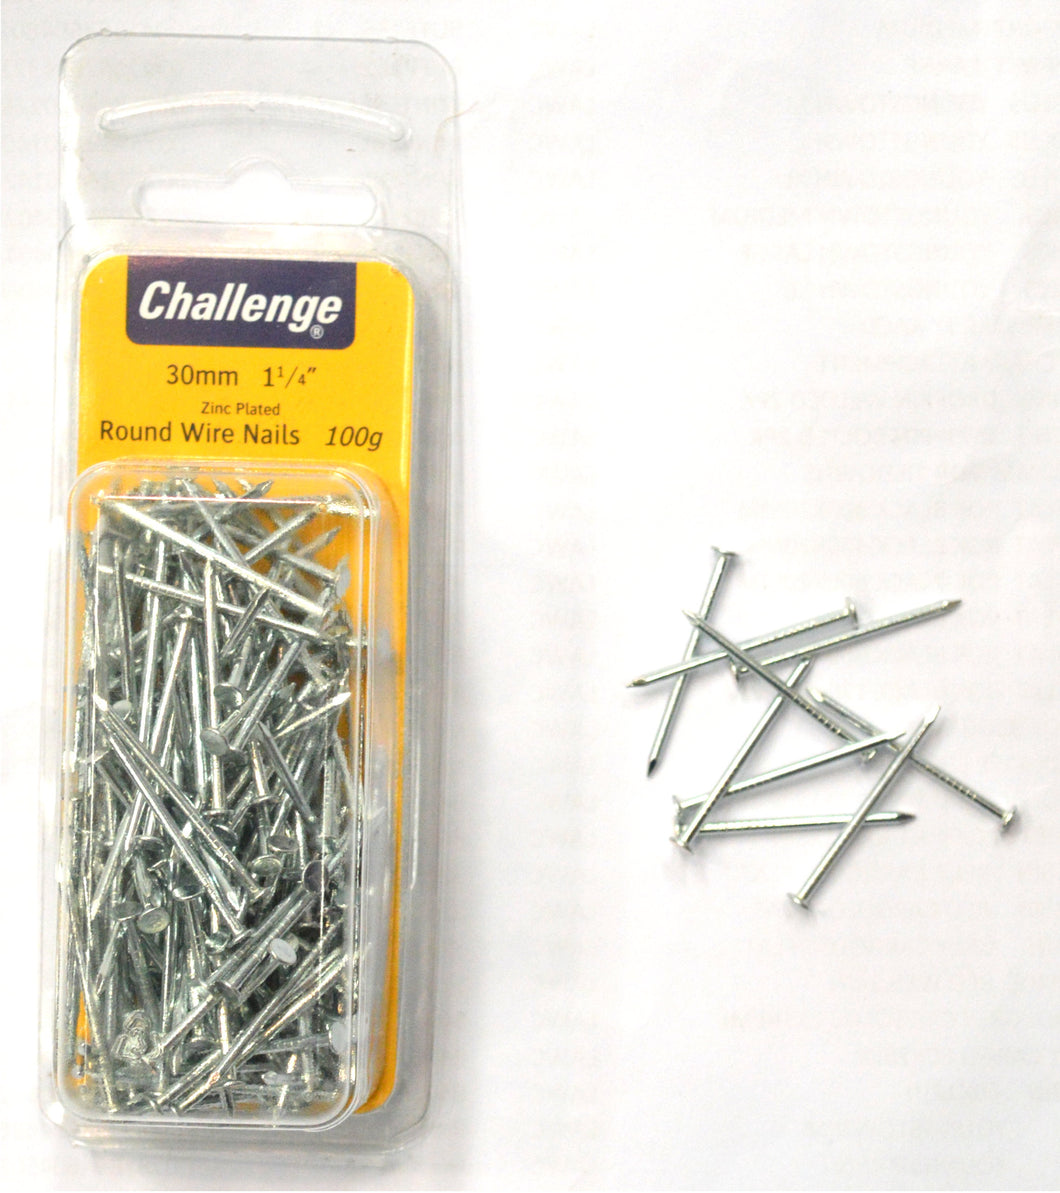 Flathead Wire Nails ZP - 100gm Blister Pack 30mm Challenge